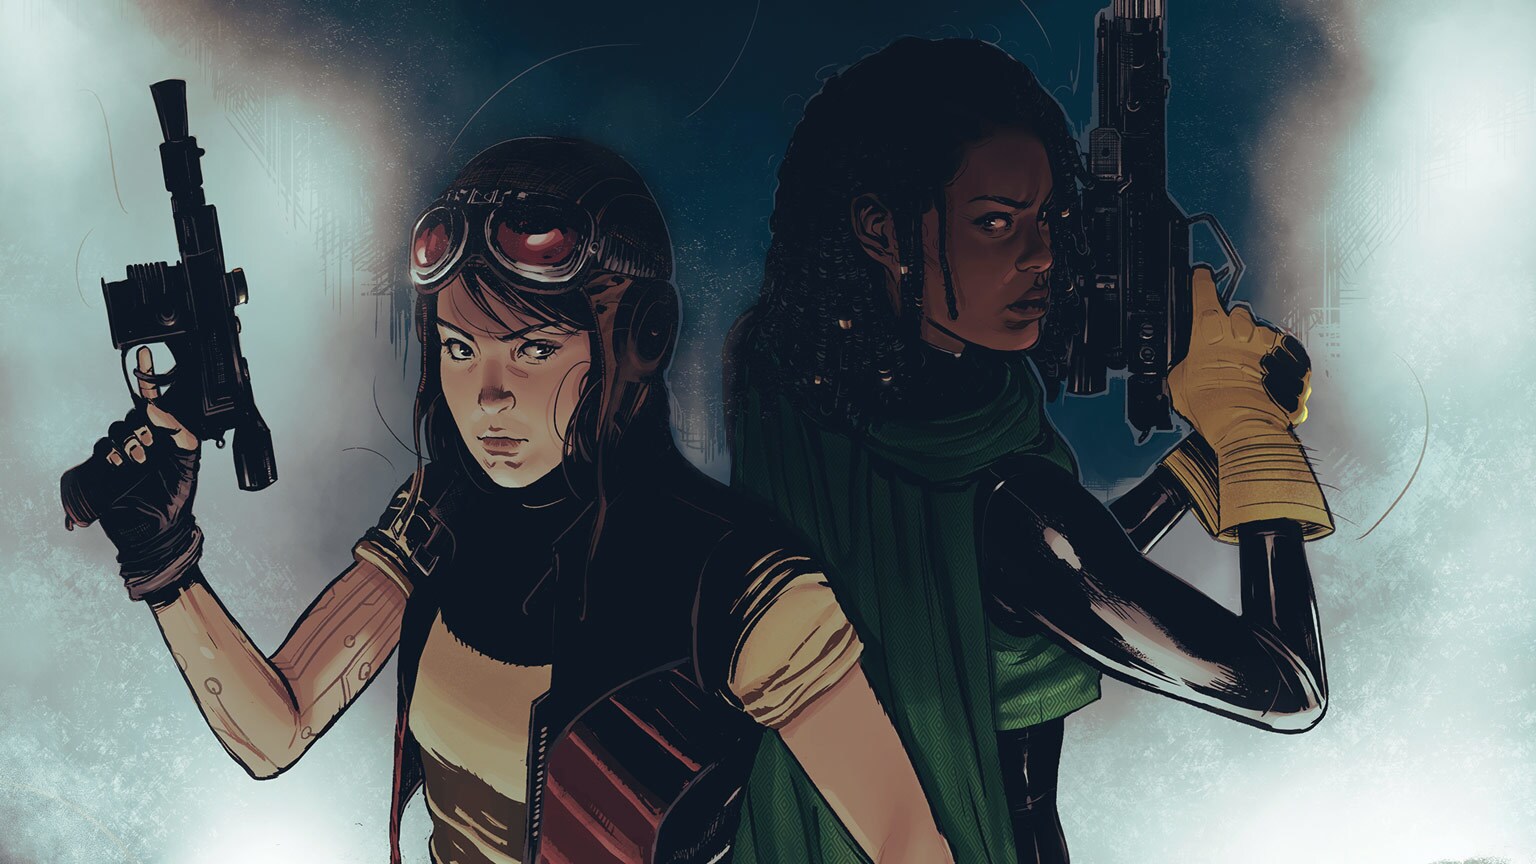 Doctor Aphra Crosses Paths with Sana Starros, and More from Marvel's January 2021 Star Wars Comics - Exclusive Preview